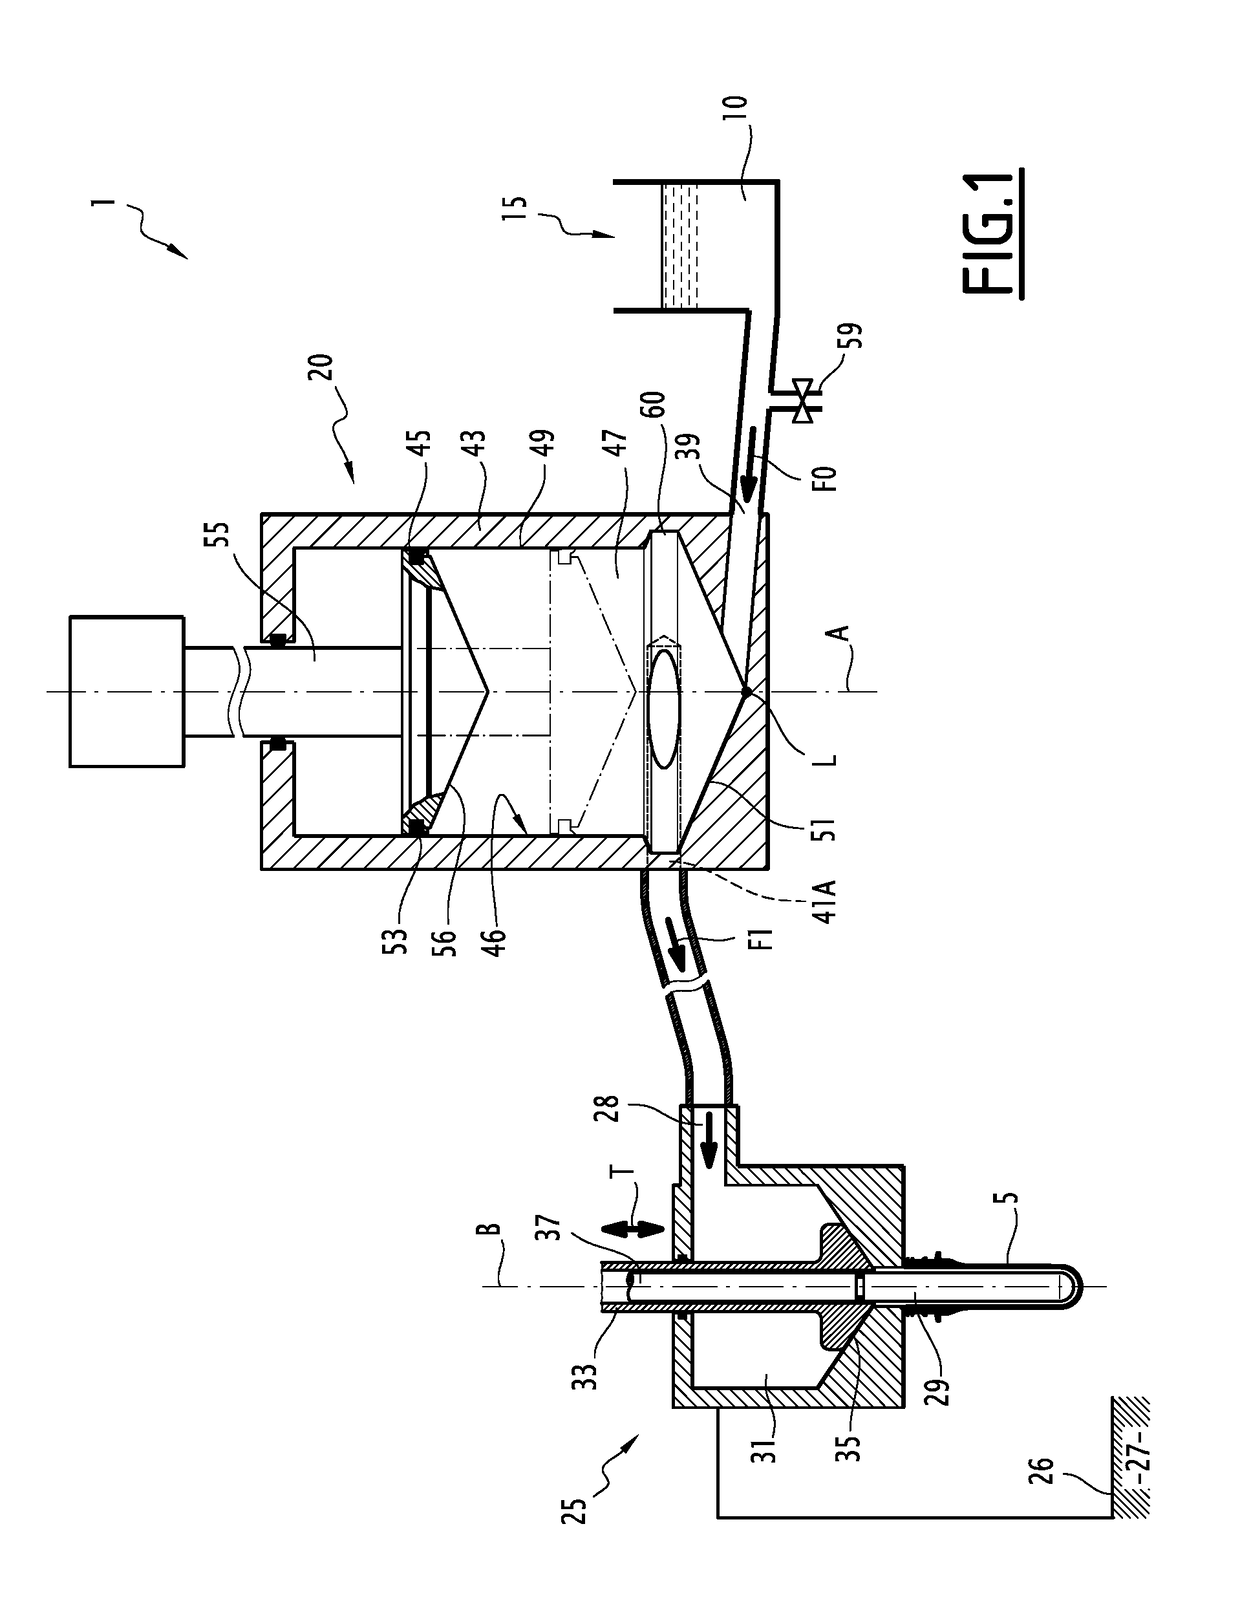 Injection Device for a Forming and Filing a Container using a Pressurized Liquid